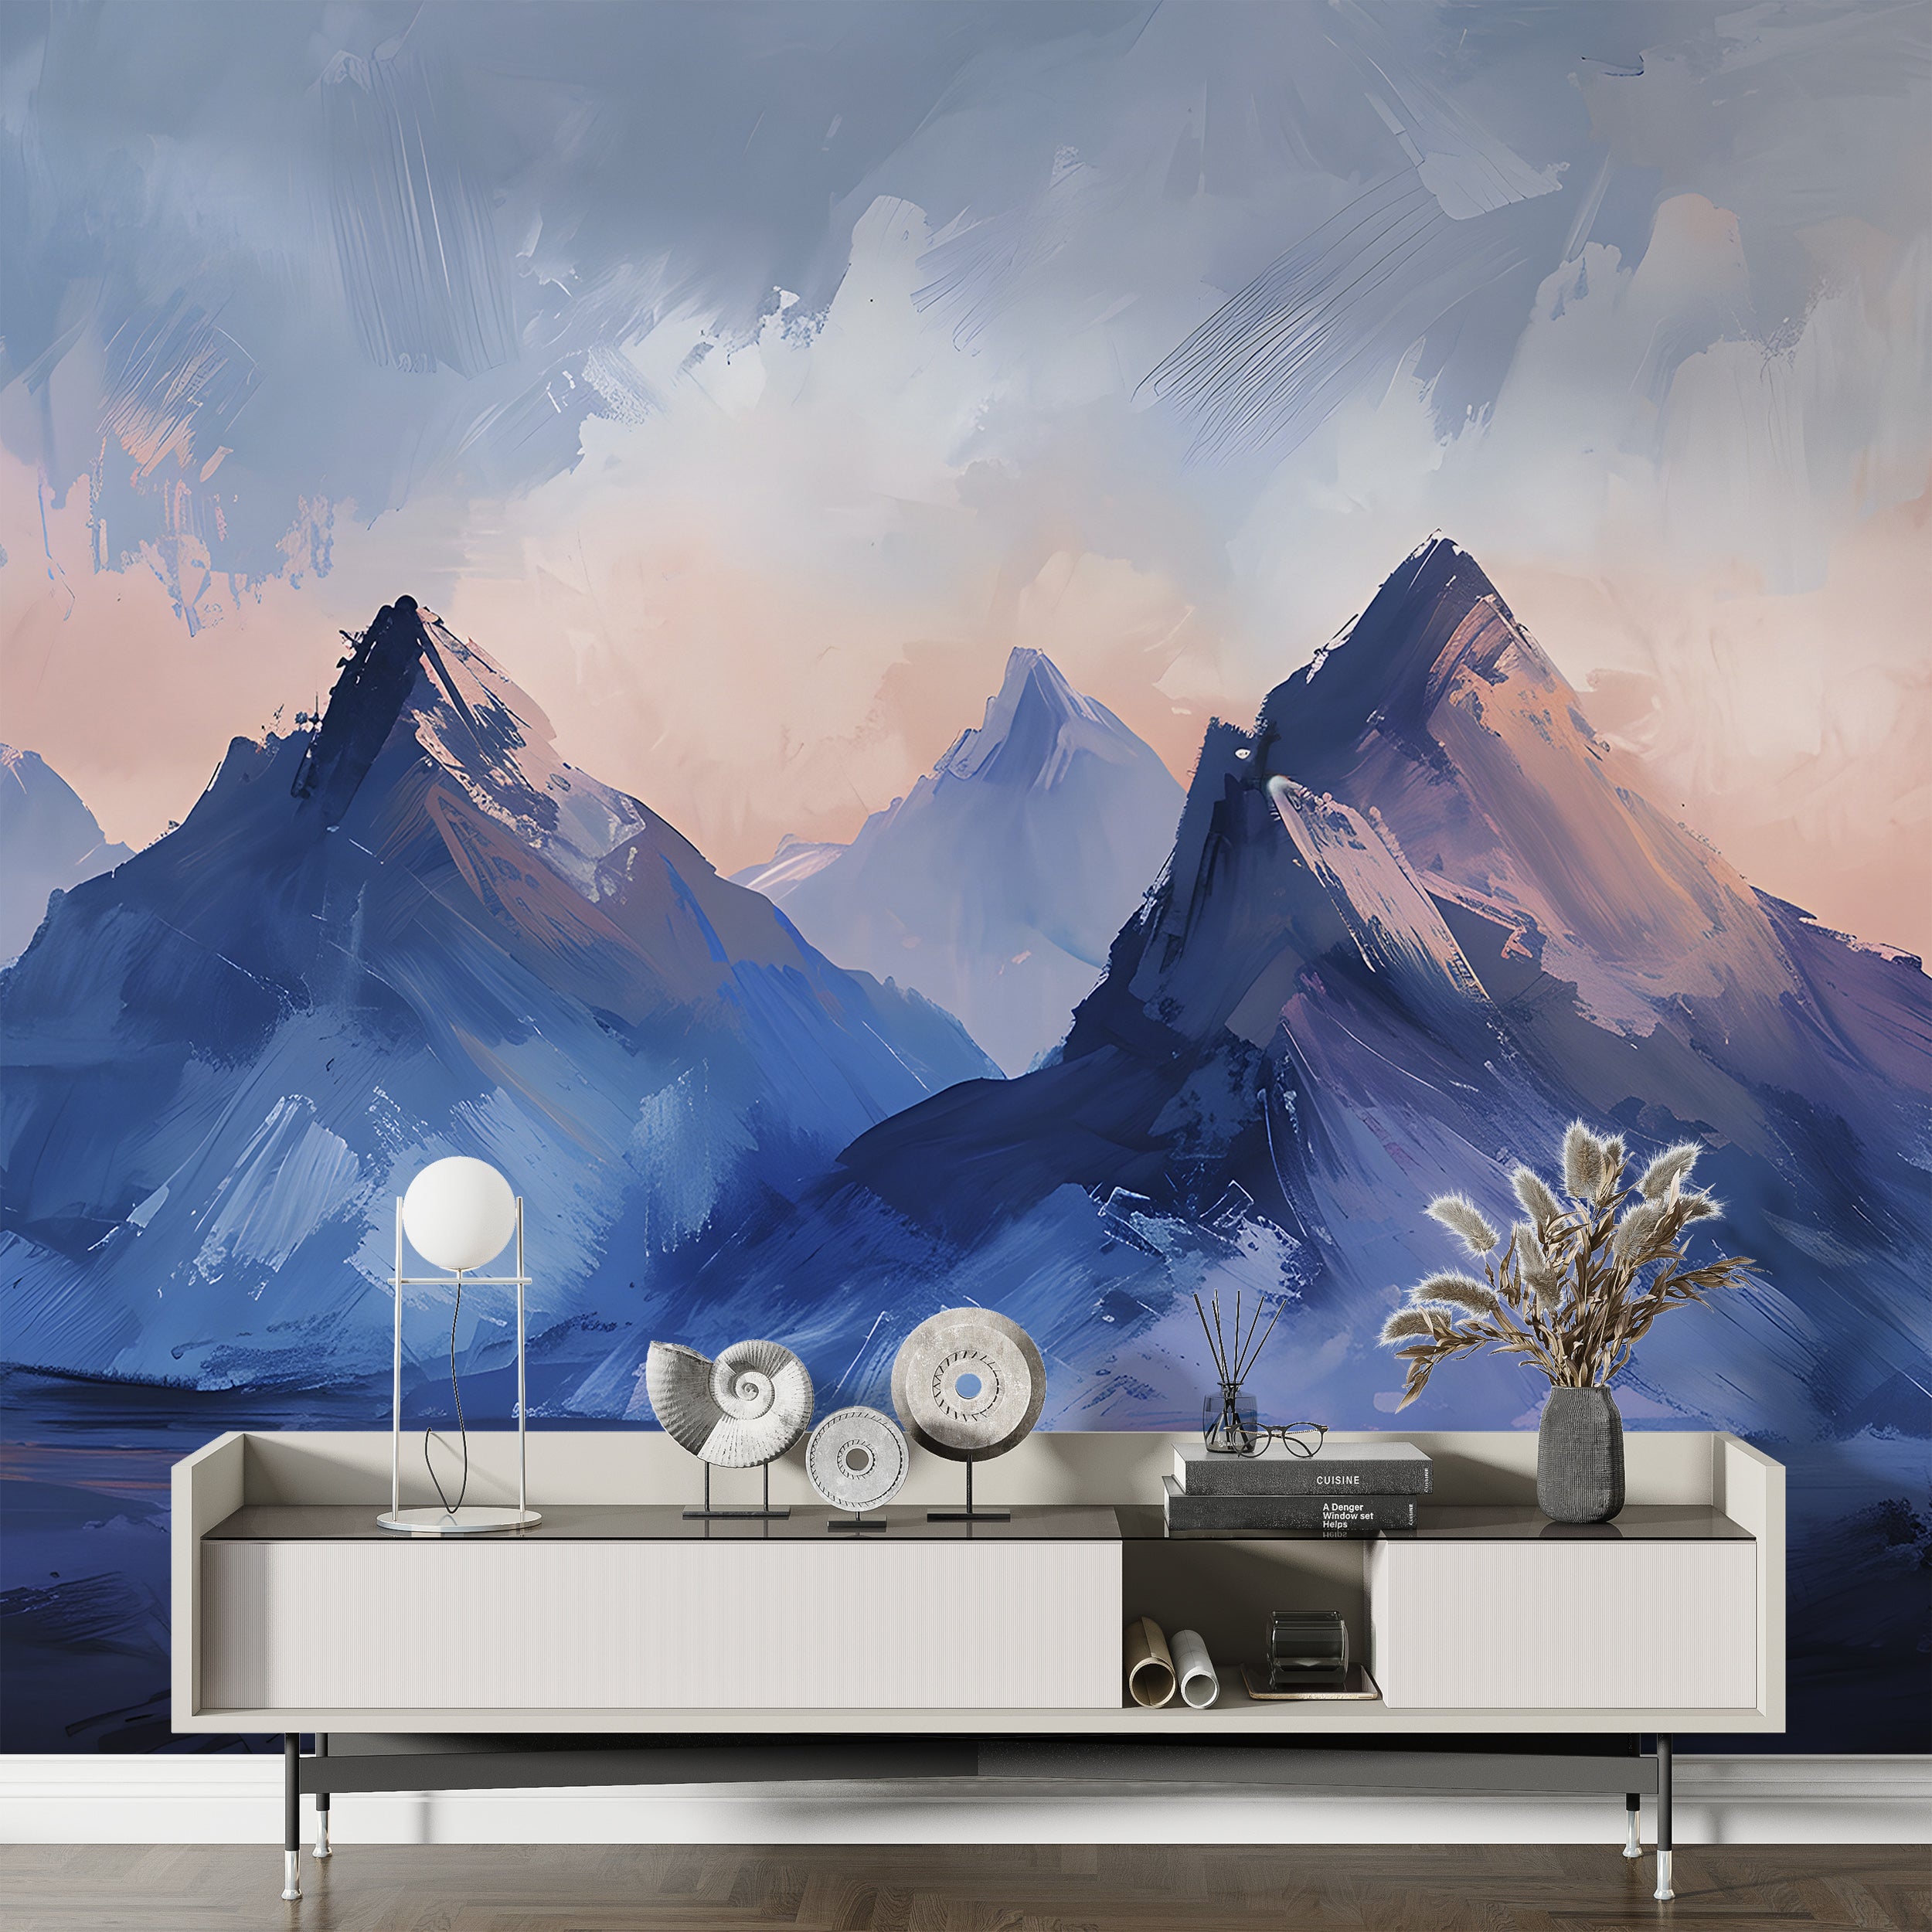 Oil Brushed Style Mountains Mural, Peel and Stick Blue Mountain, Watercolor Abstract Landscape, Nursery Deep Blue Wall Art, PVC free Decal